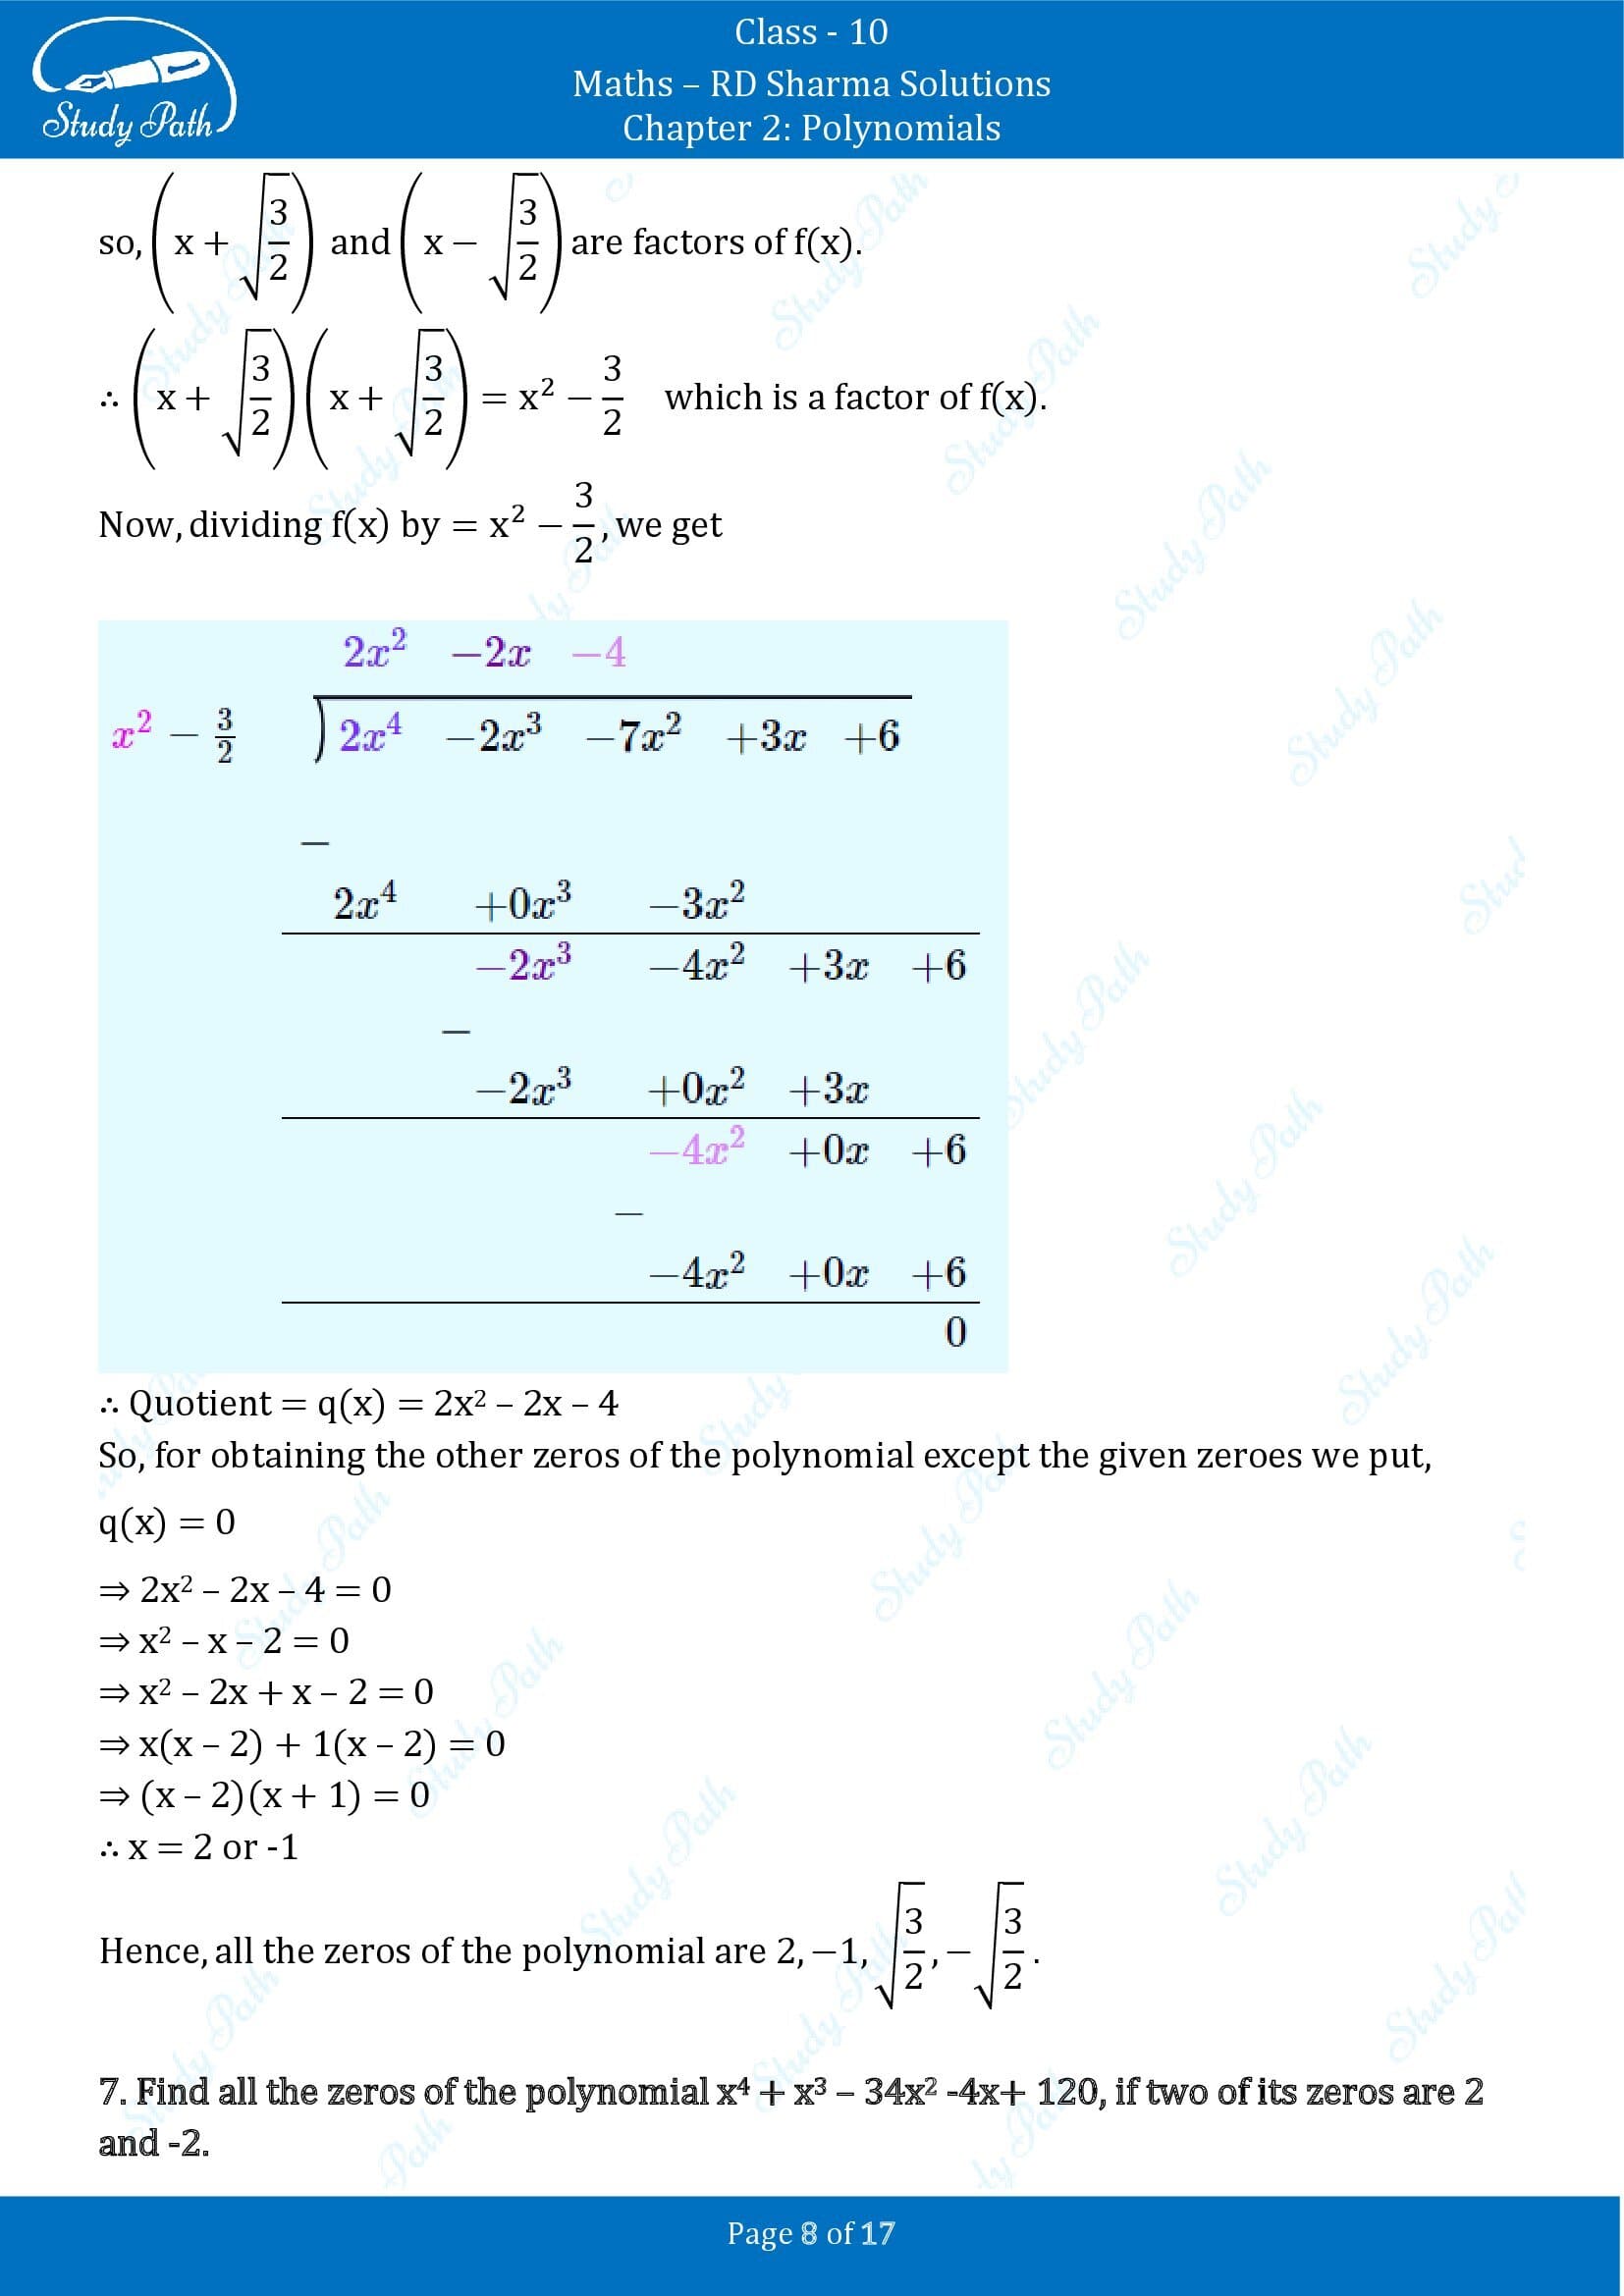 RD Sharma Solutions Class 10 Chapter 2 Polynomials Exercise 2.3 00008